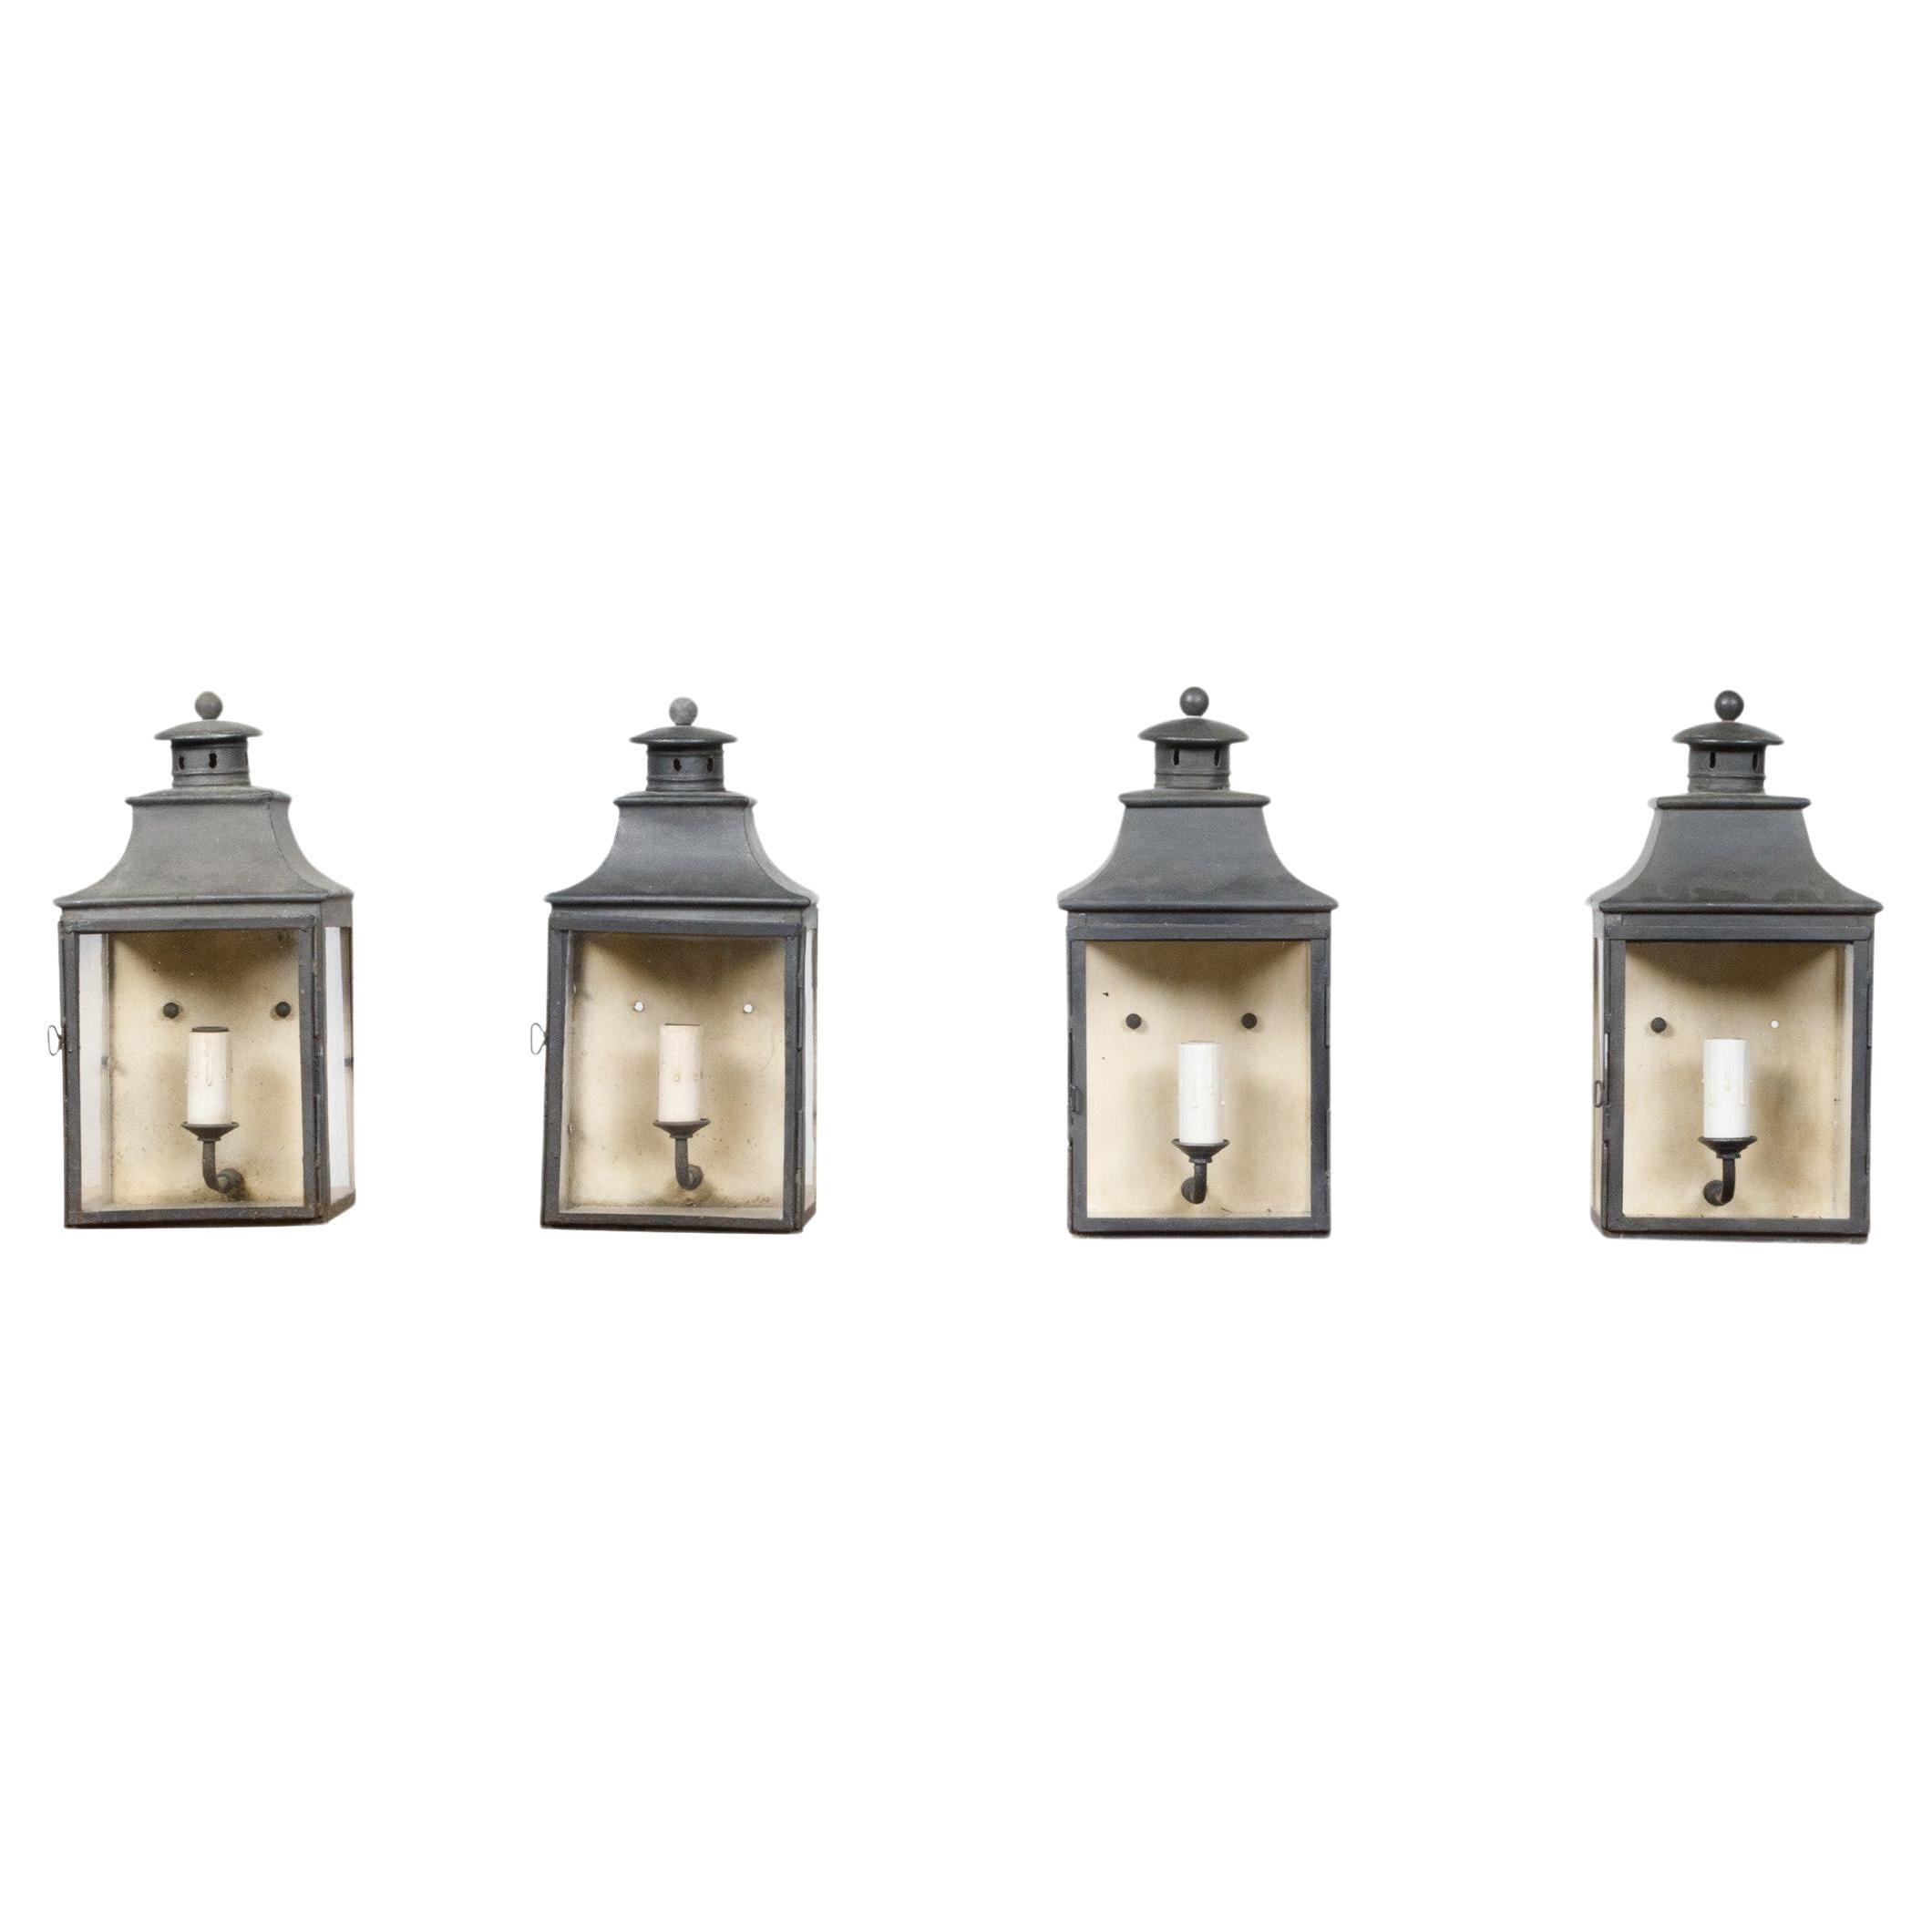 Set of Four English Turn of the Century Single-Light Copper Wall Mount Lanterns For Sale